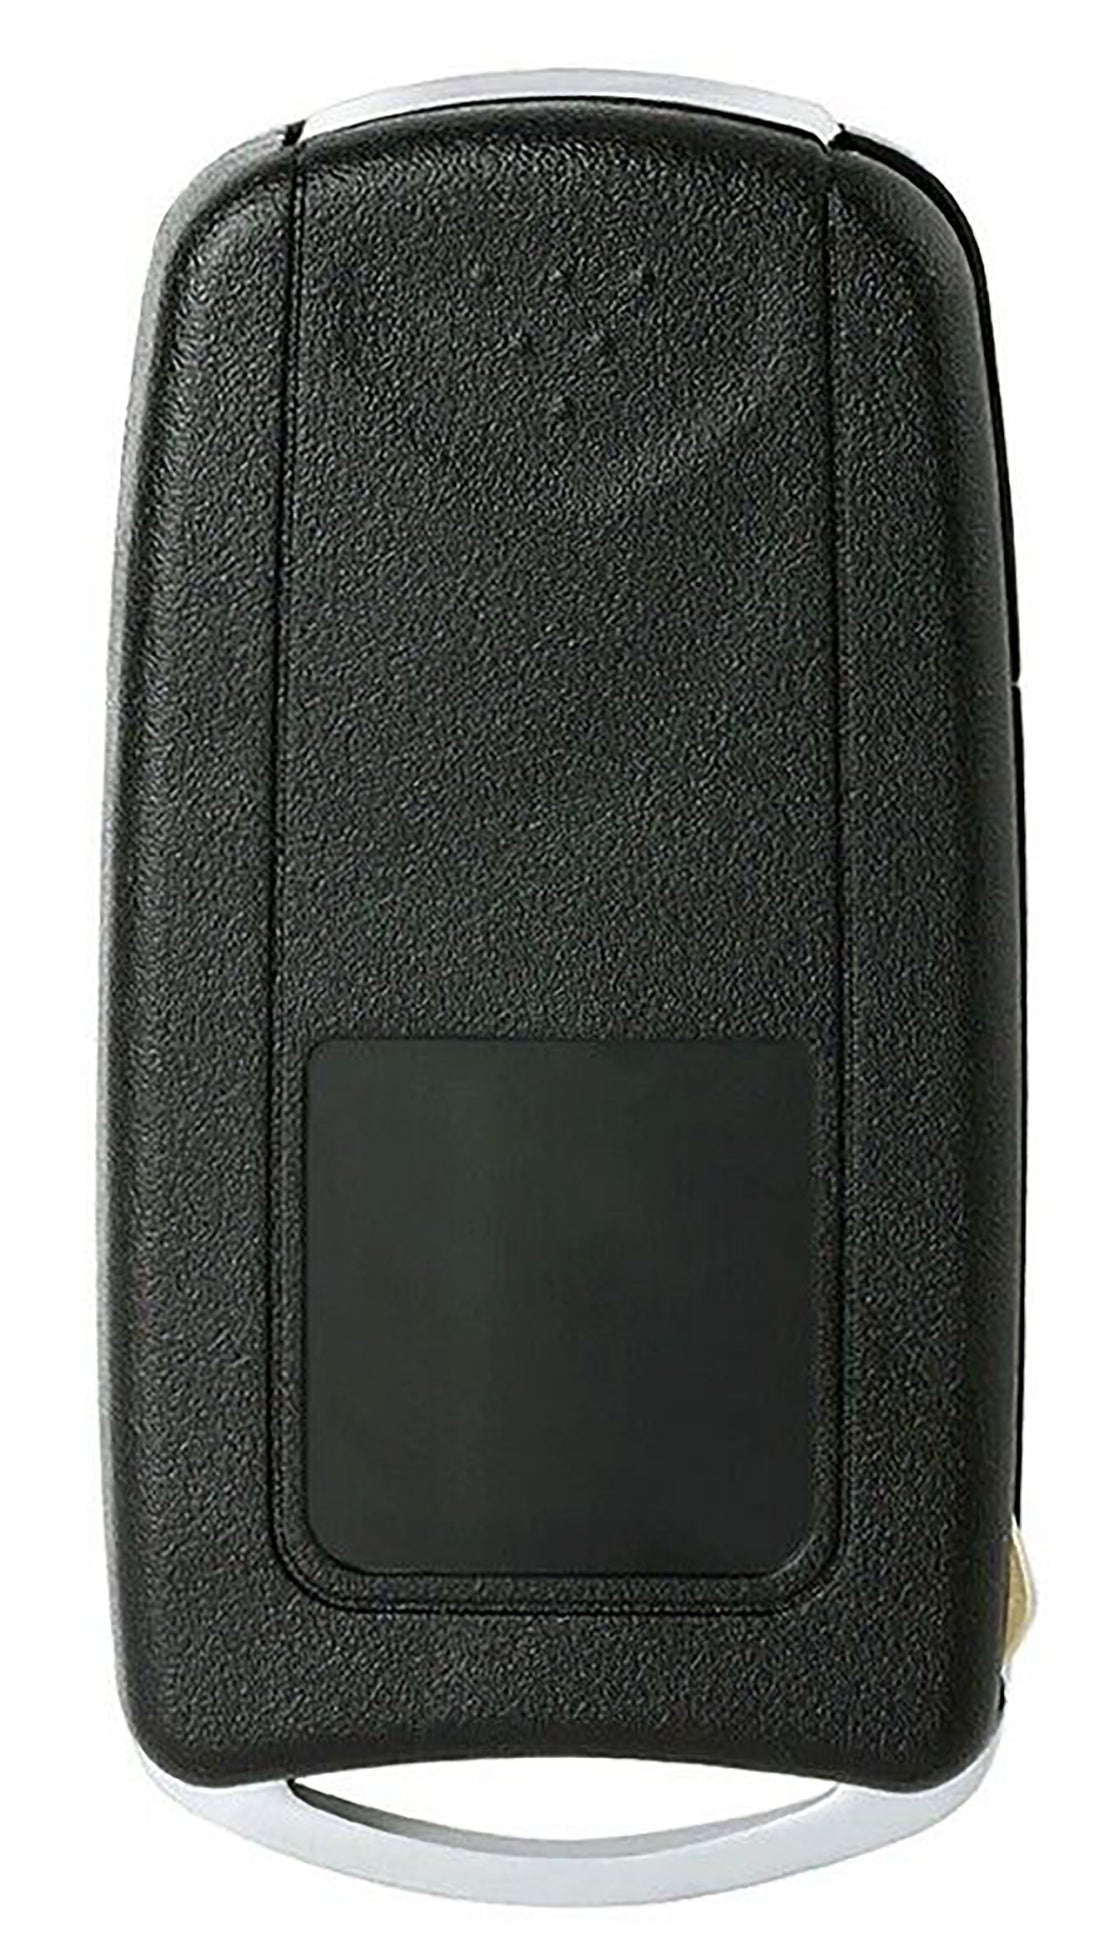 2009 Acura TSX Replacement Key Fob Remote